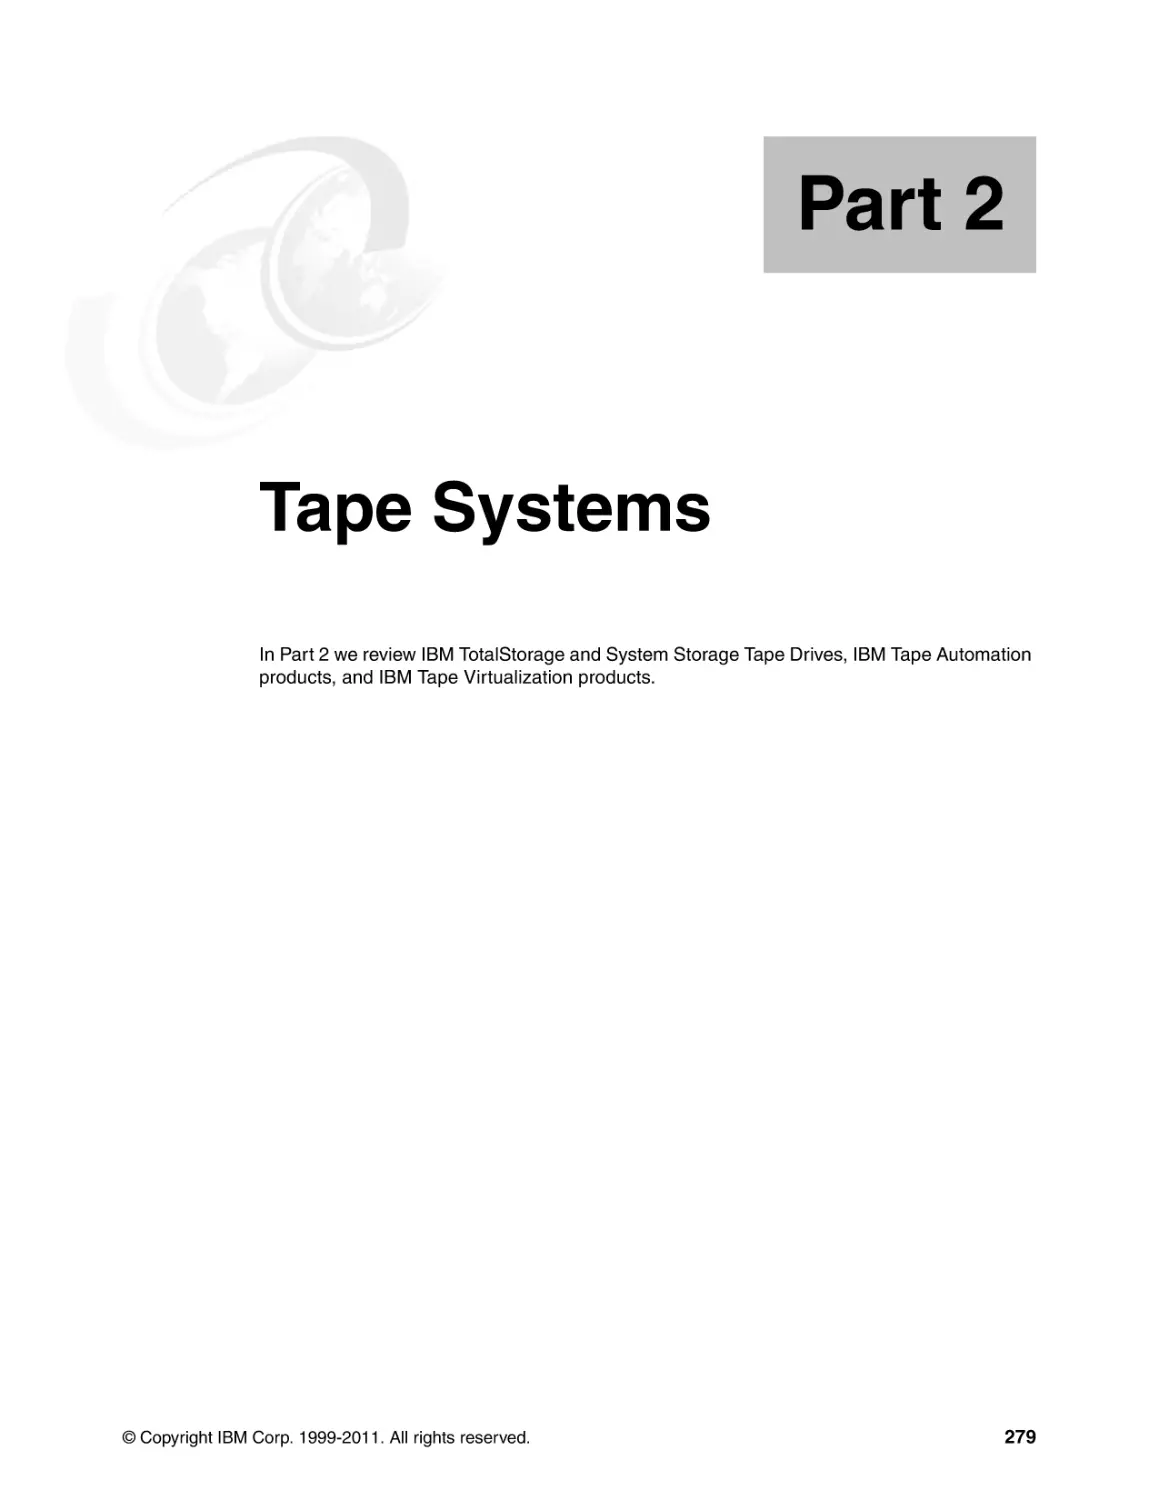 Part 2 Tape Systems